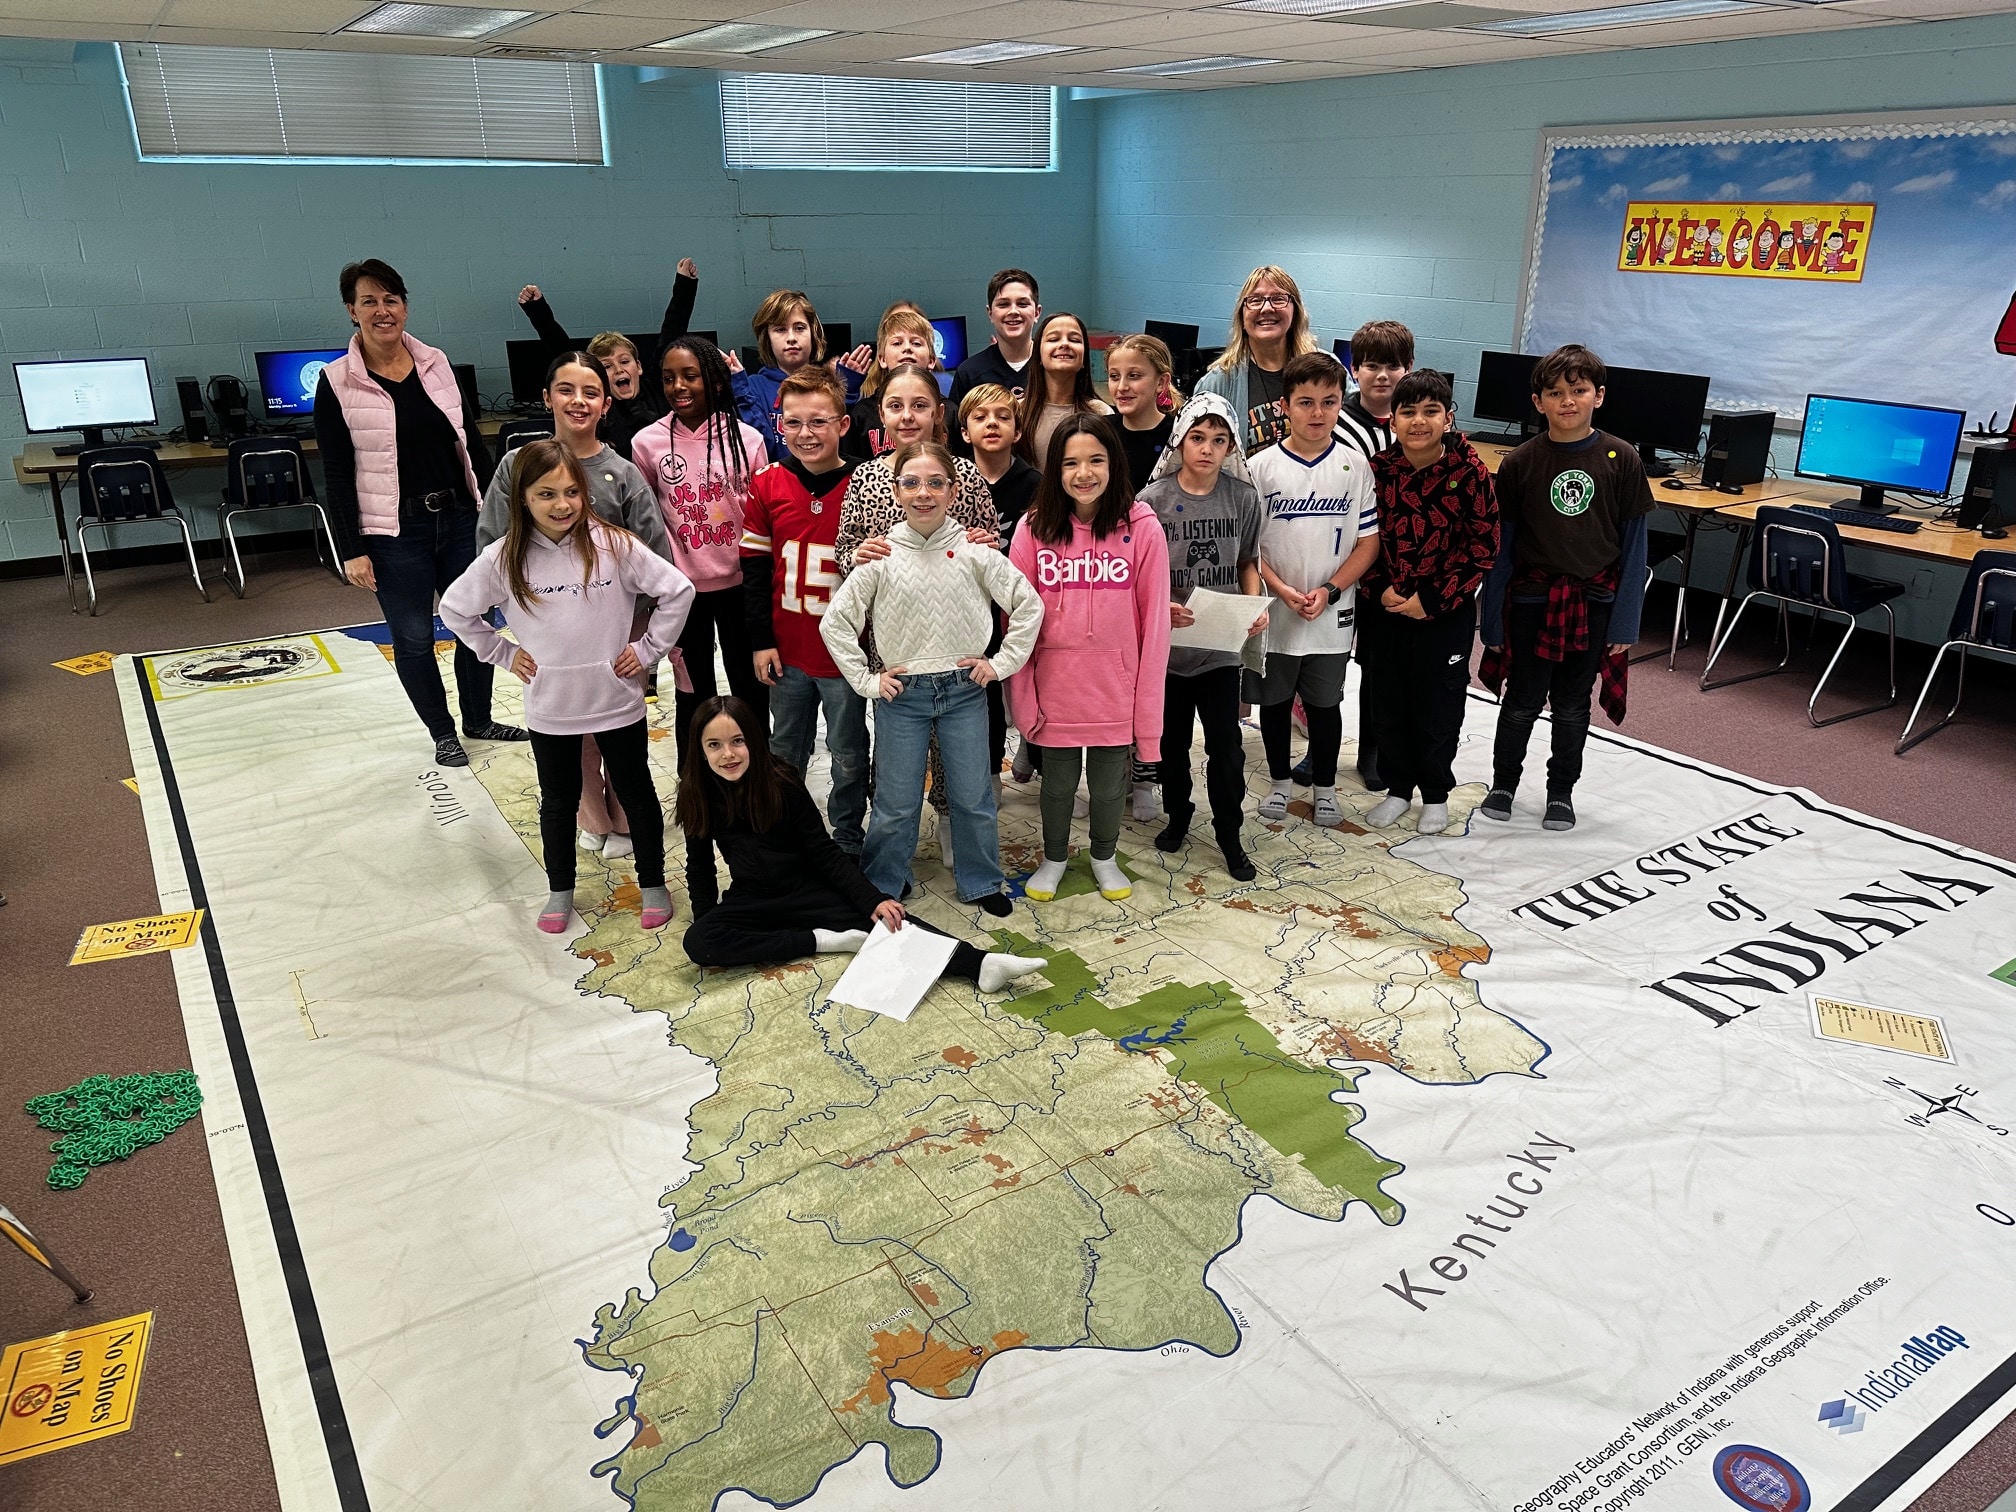 Kolling 4th-grade students learn about IN History and Geography through hands-on activities and engaging with a giant 21' x 15' map. The map and guest teacher, Mrs. Steinhardt, visited us from the Geography Educators Network of Indiana.